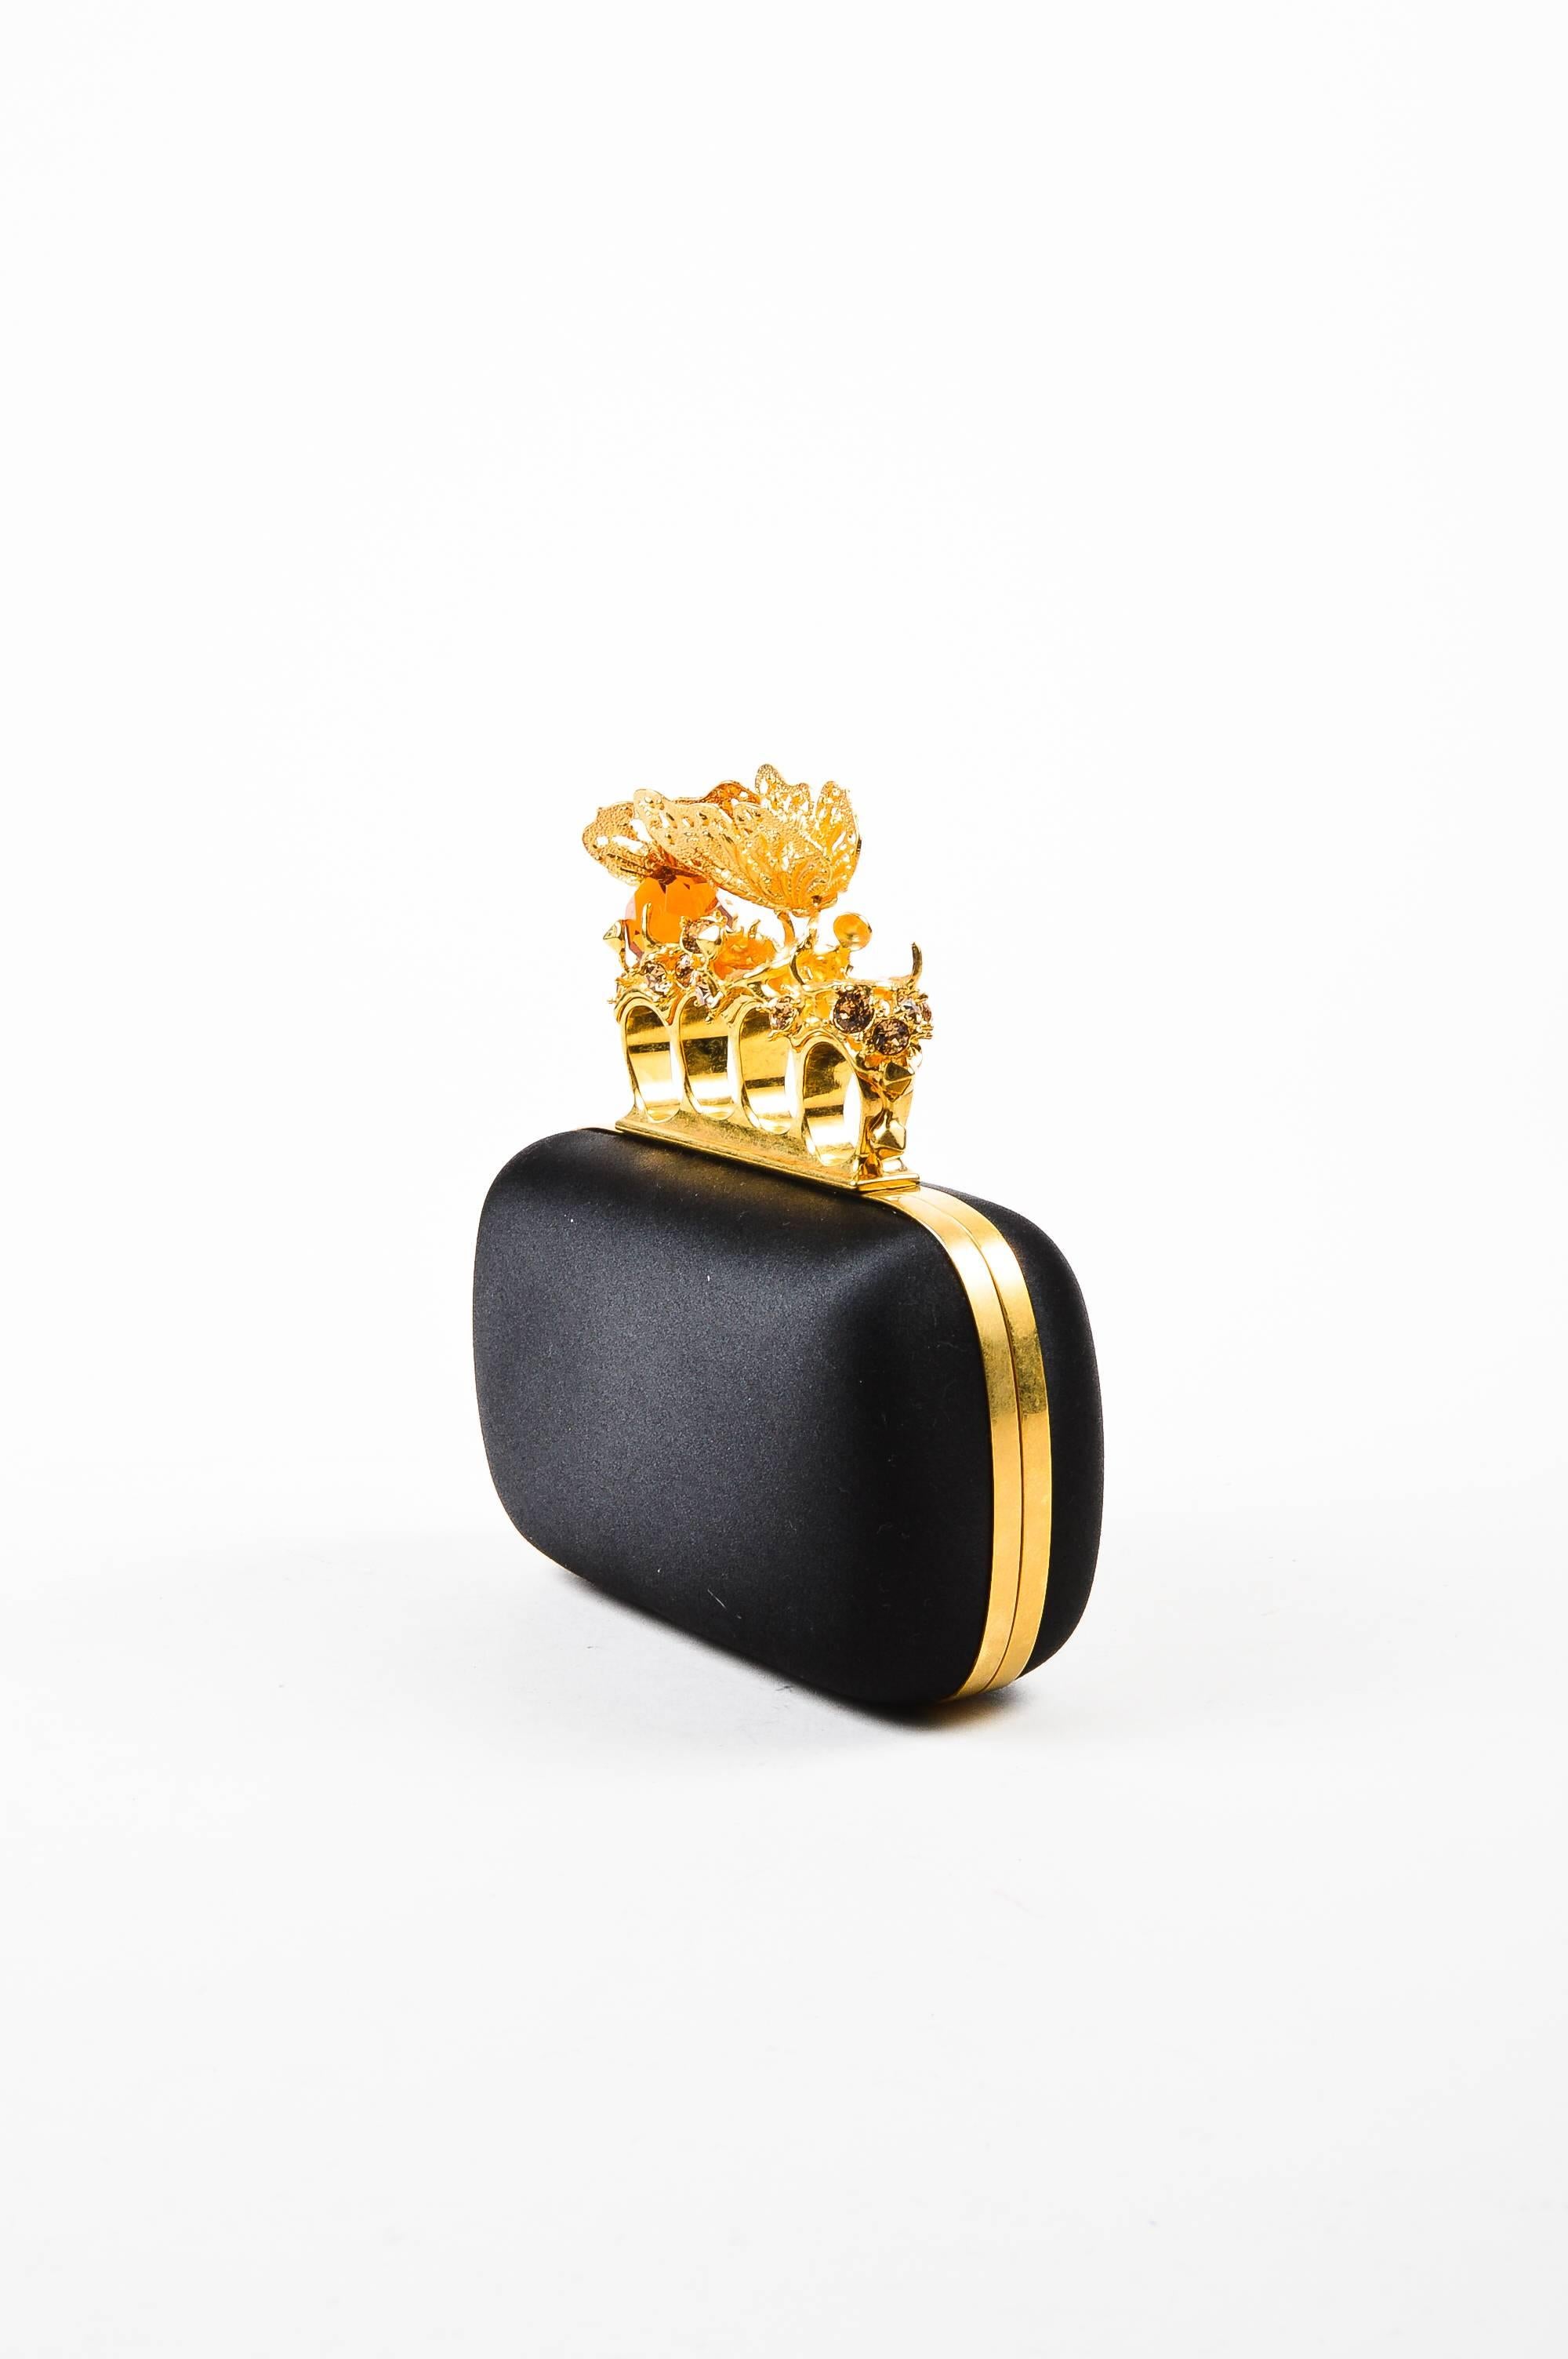 Comes in box with dust bag. Striking black satin clutch is trimmed with gold-tone metal. Push lock closure at top. Knuckle carry top is embellished with gorgeous crystal stones and metal butterflies. Spiked stud details and small skull hiding